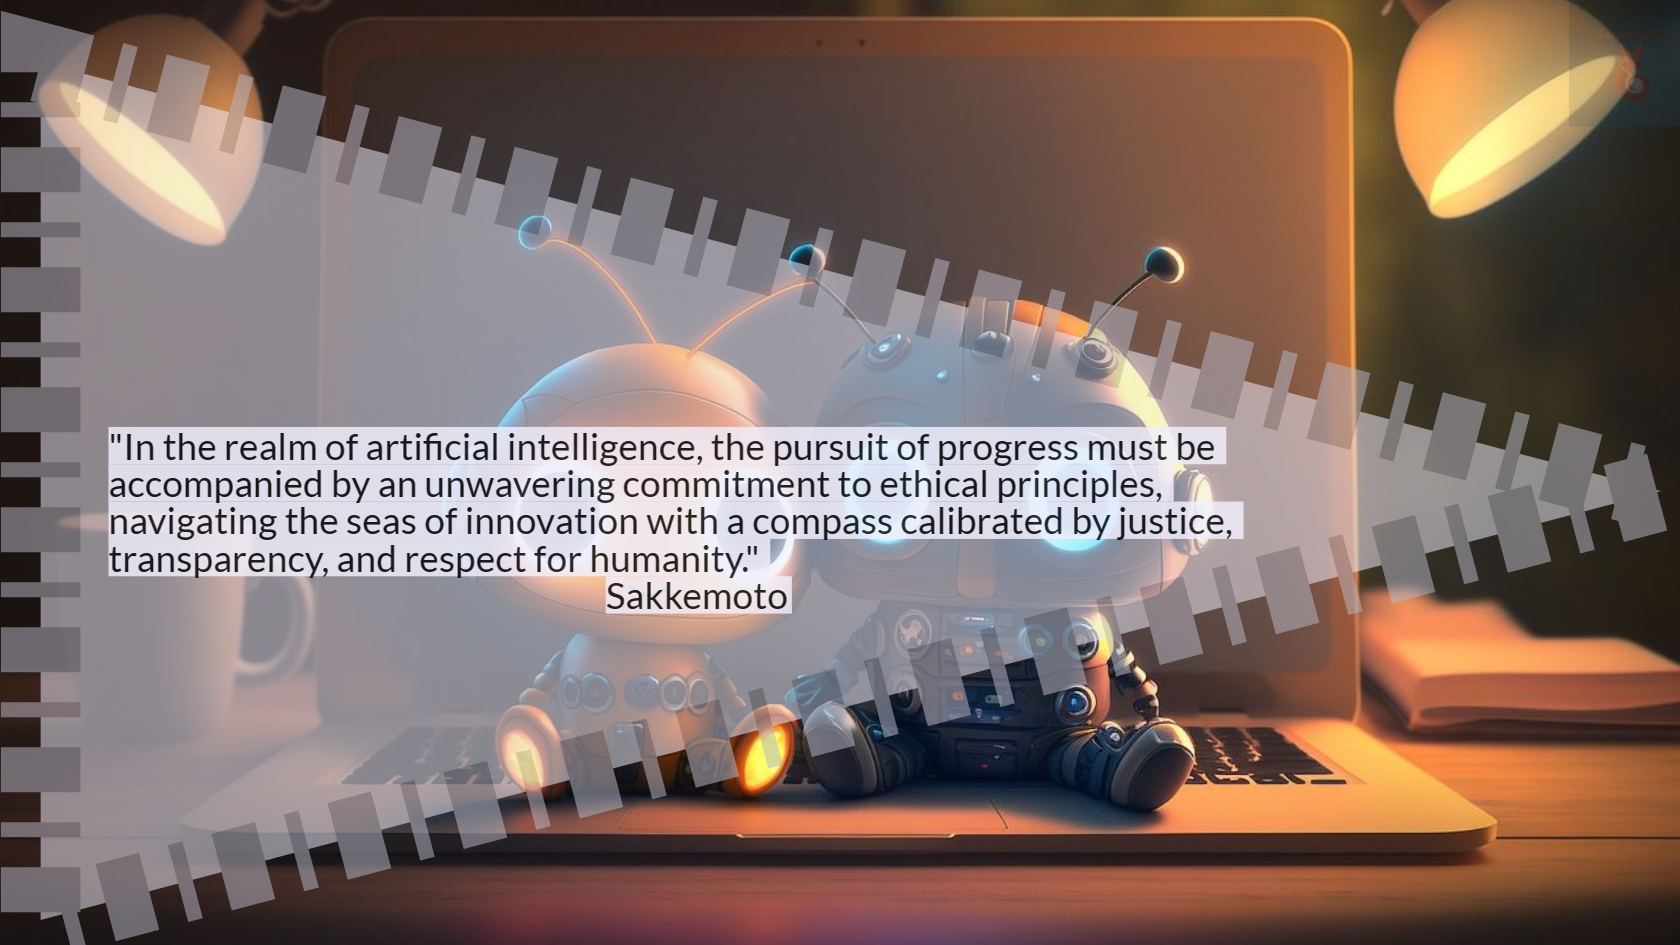 In the realm of artificial intelligence, the pursuit of progress must be accompanied by an unwavering commitment to ethical principles,